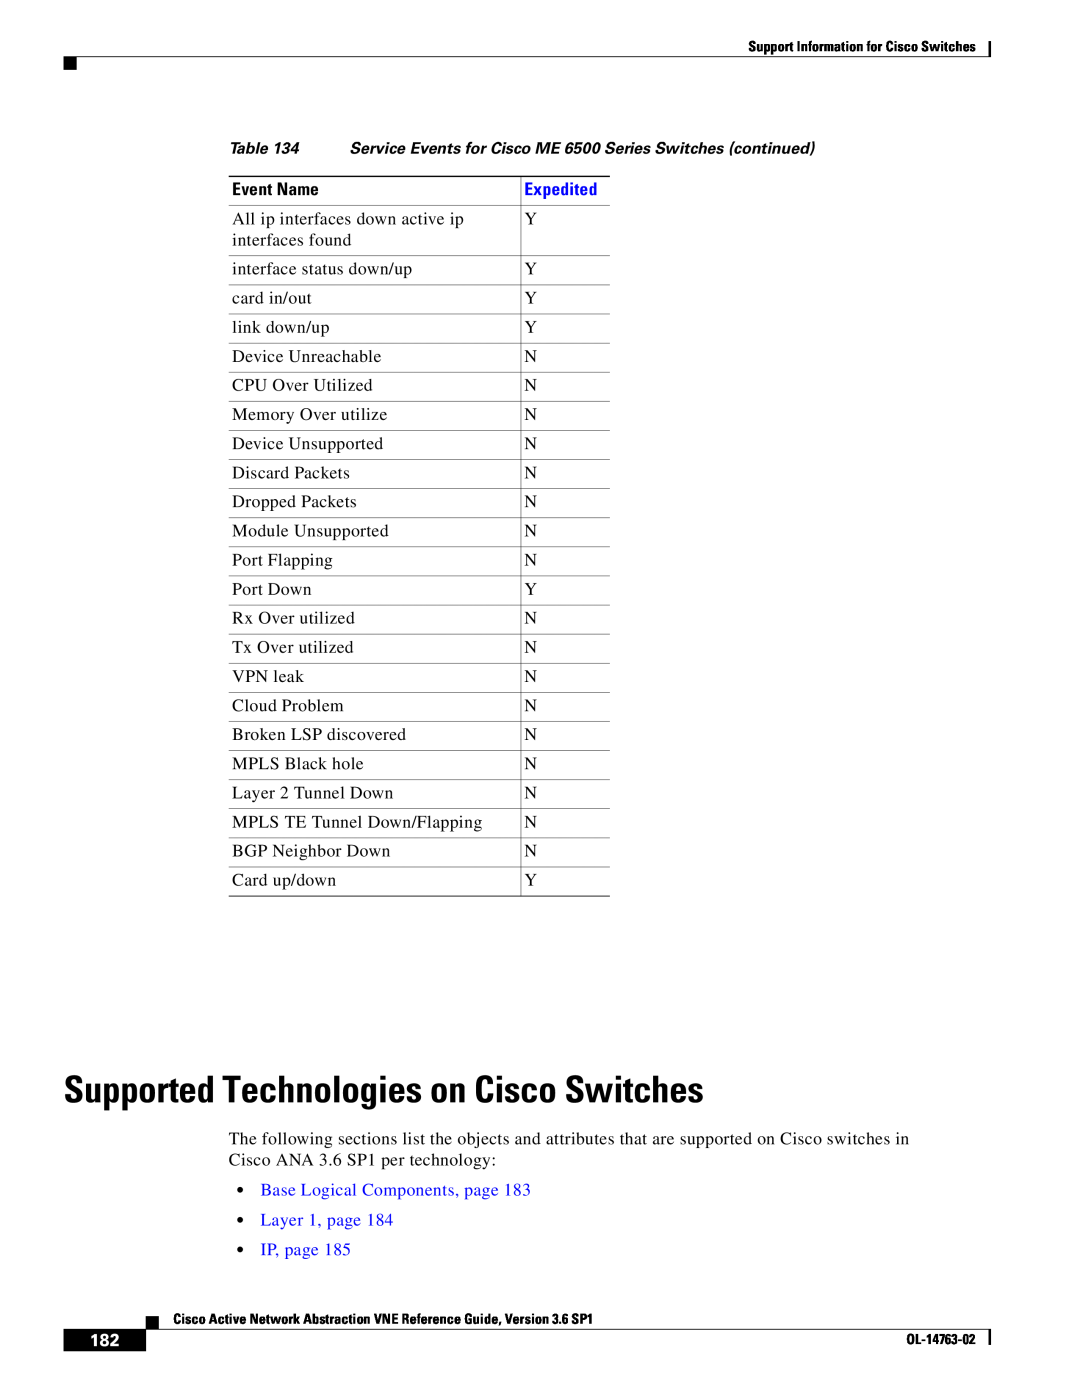 Cisco Systems OL-14763-02 manual Supported Technologies on Cisco Switches, Event Name 